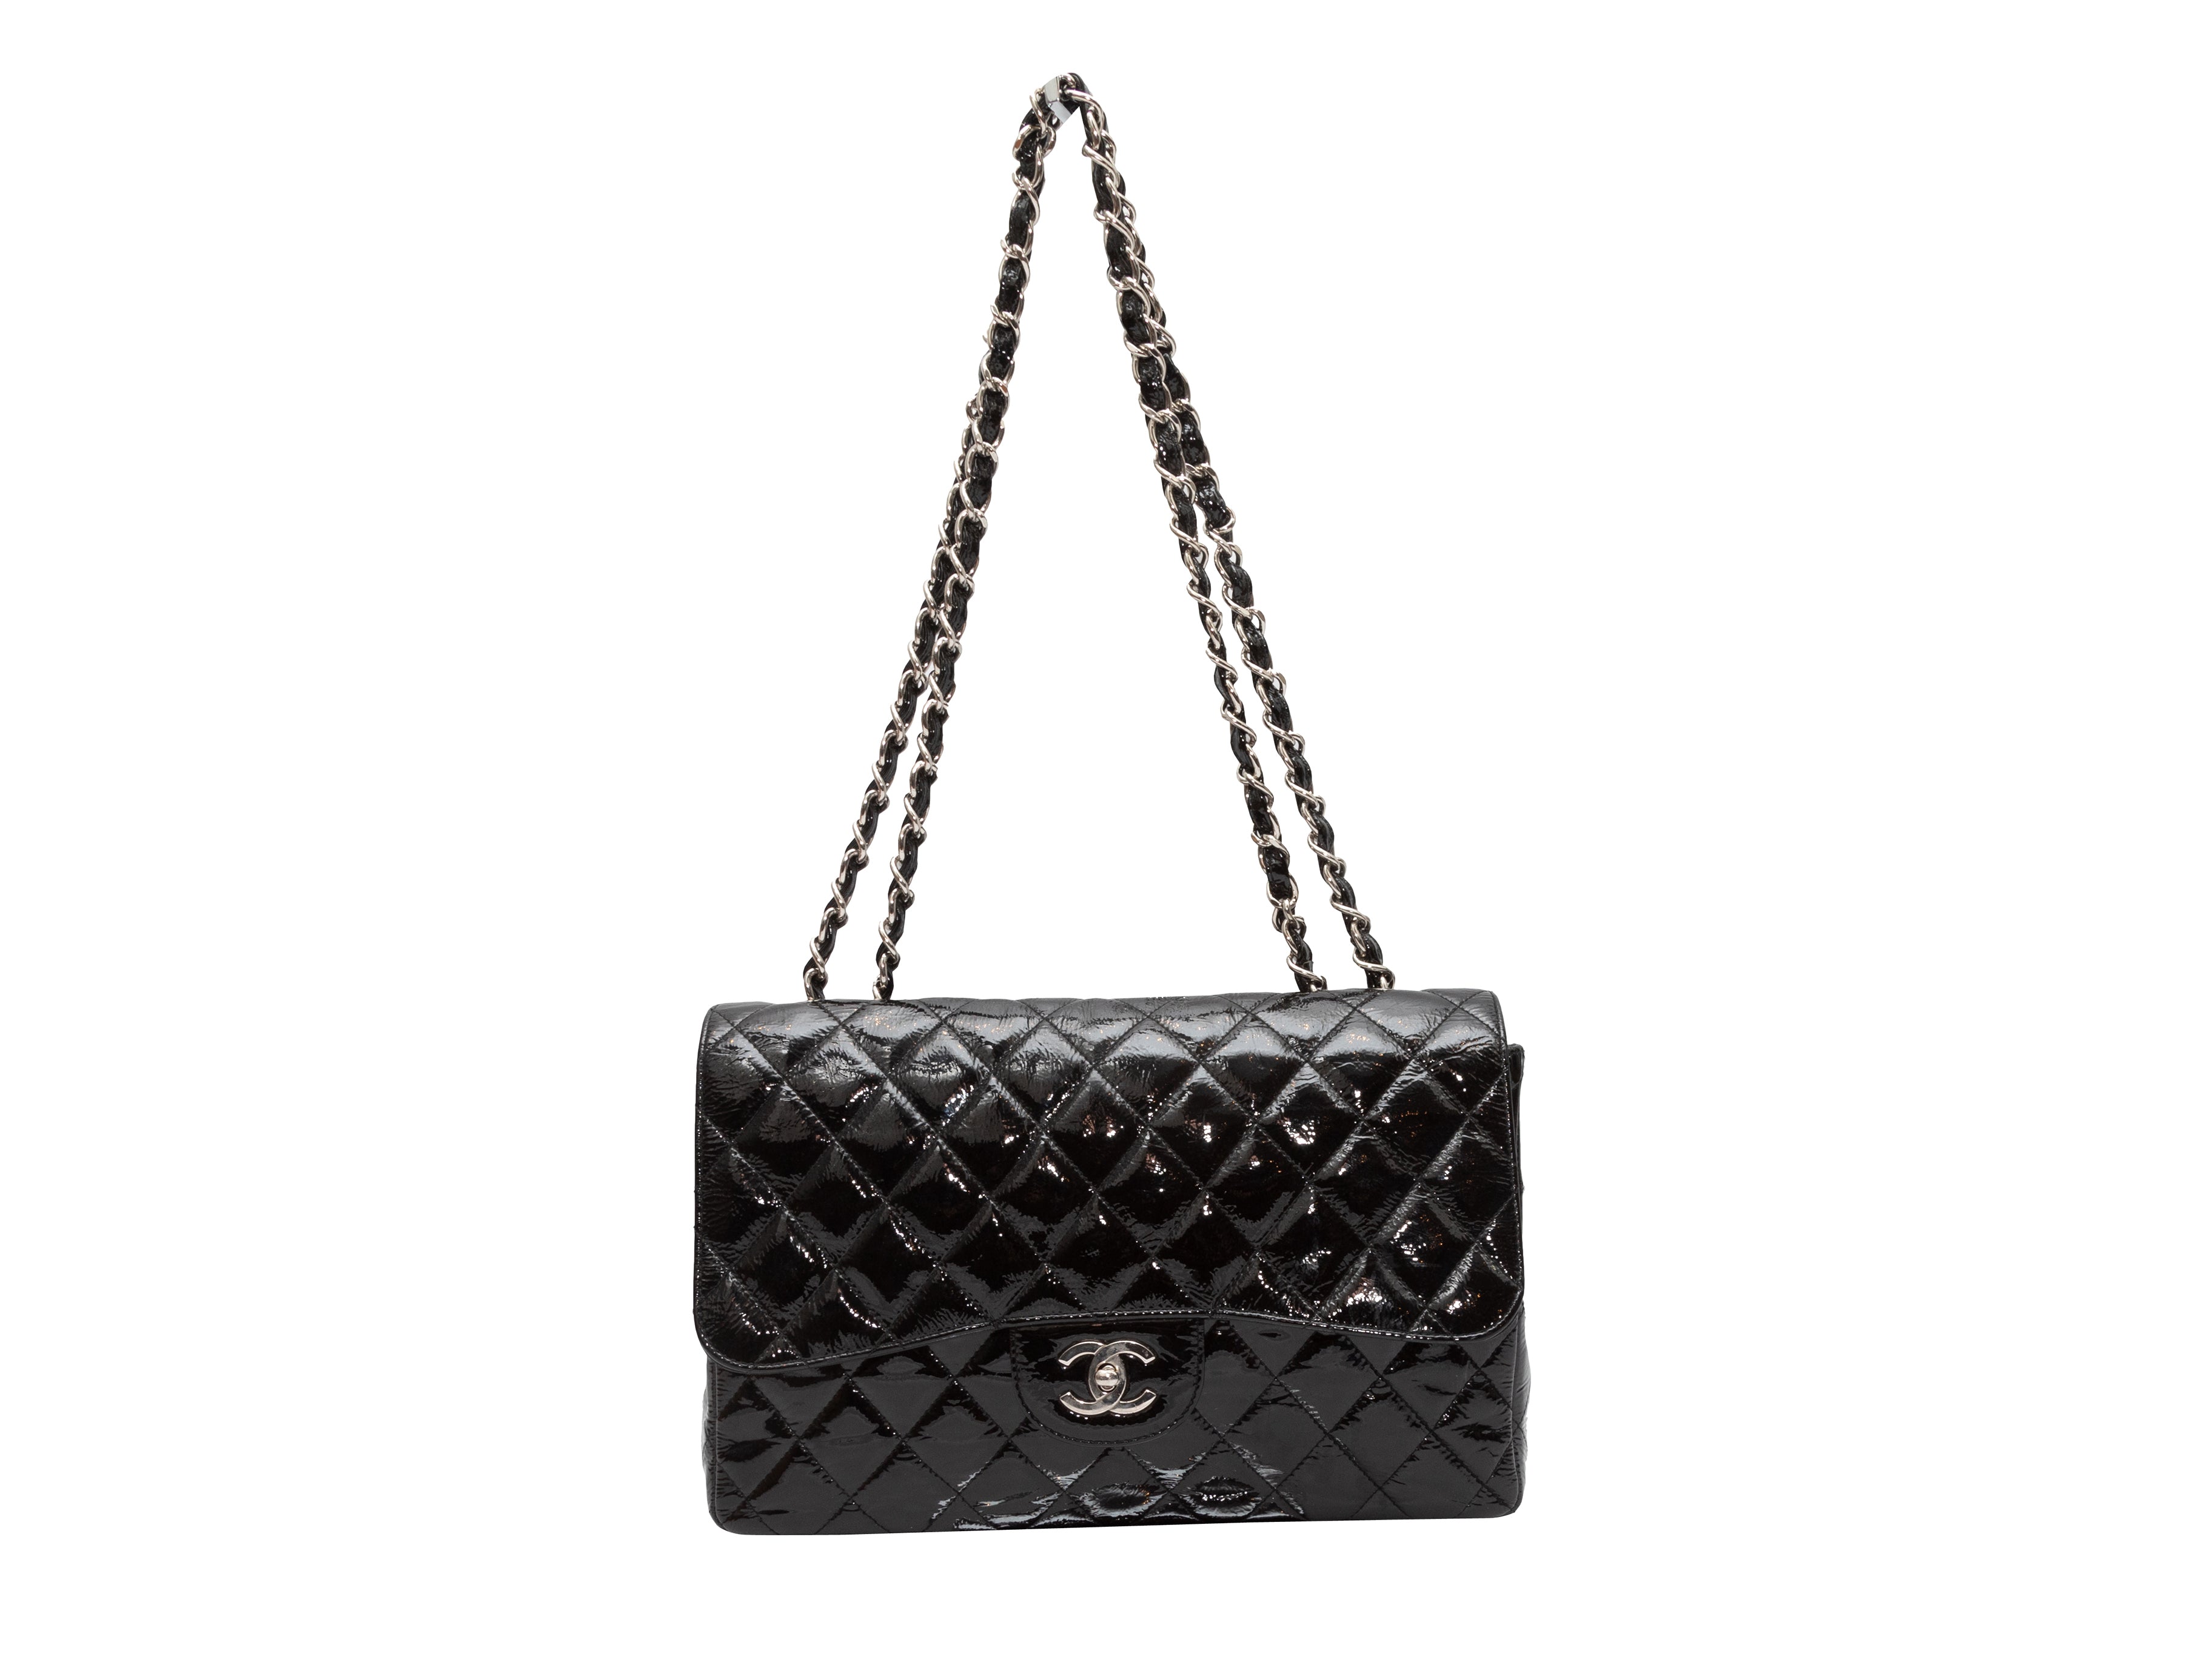 Chanel - Authenticated Timeless Classique Top Handle Handbag - Patent Leather Black for Women, Very Good Condition